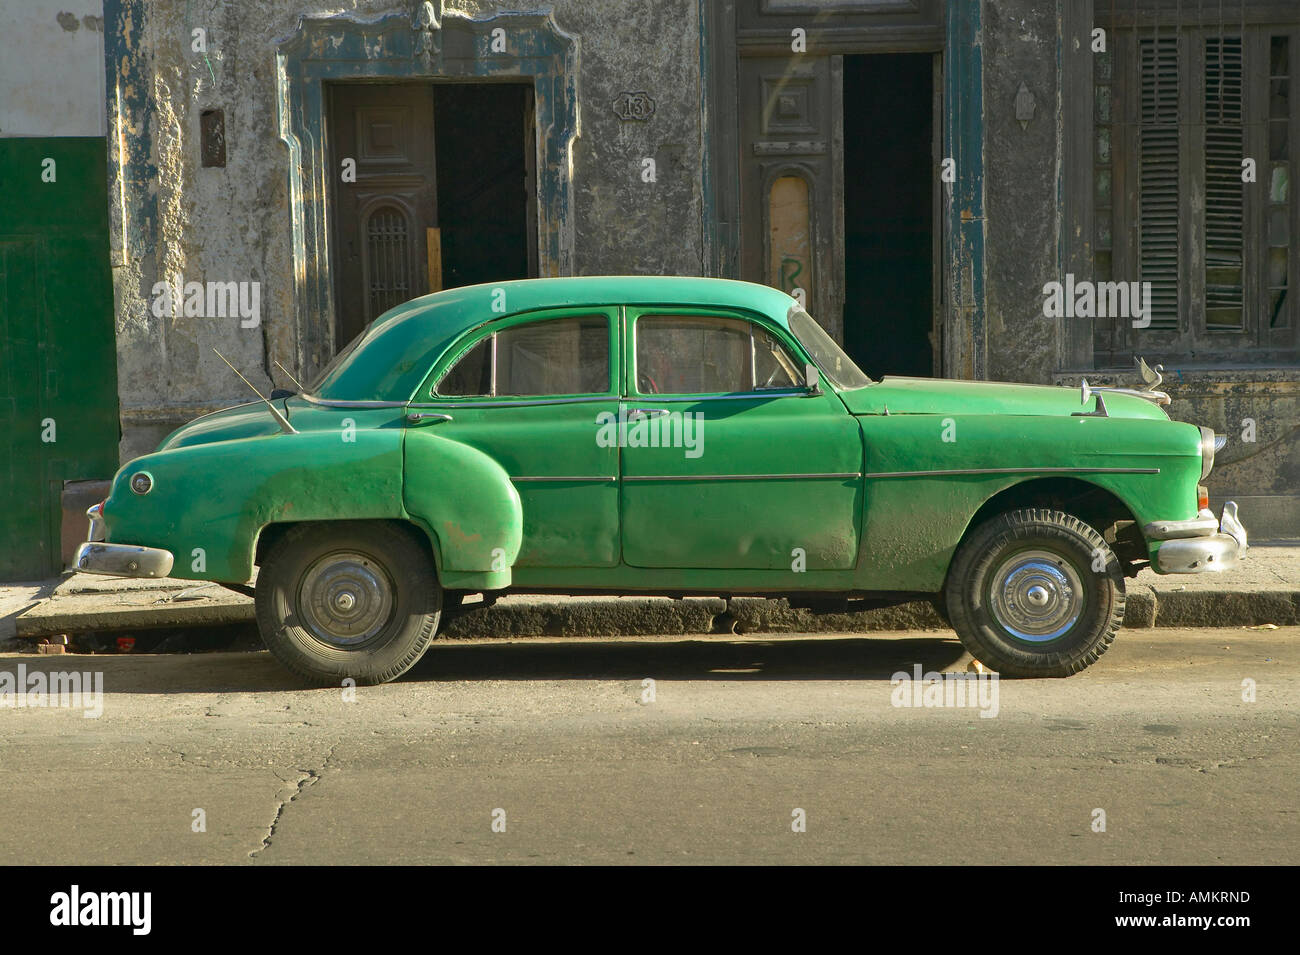 An old green car sitting in front of old building in Old Havana Cuba Stock Photo